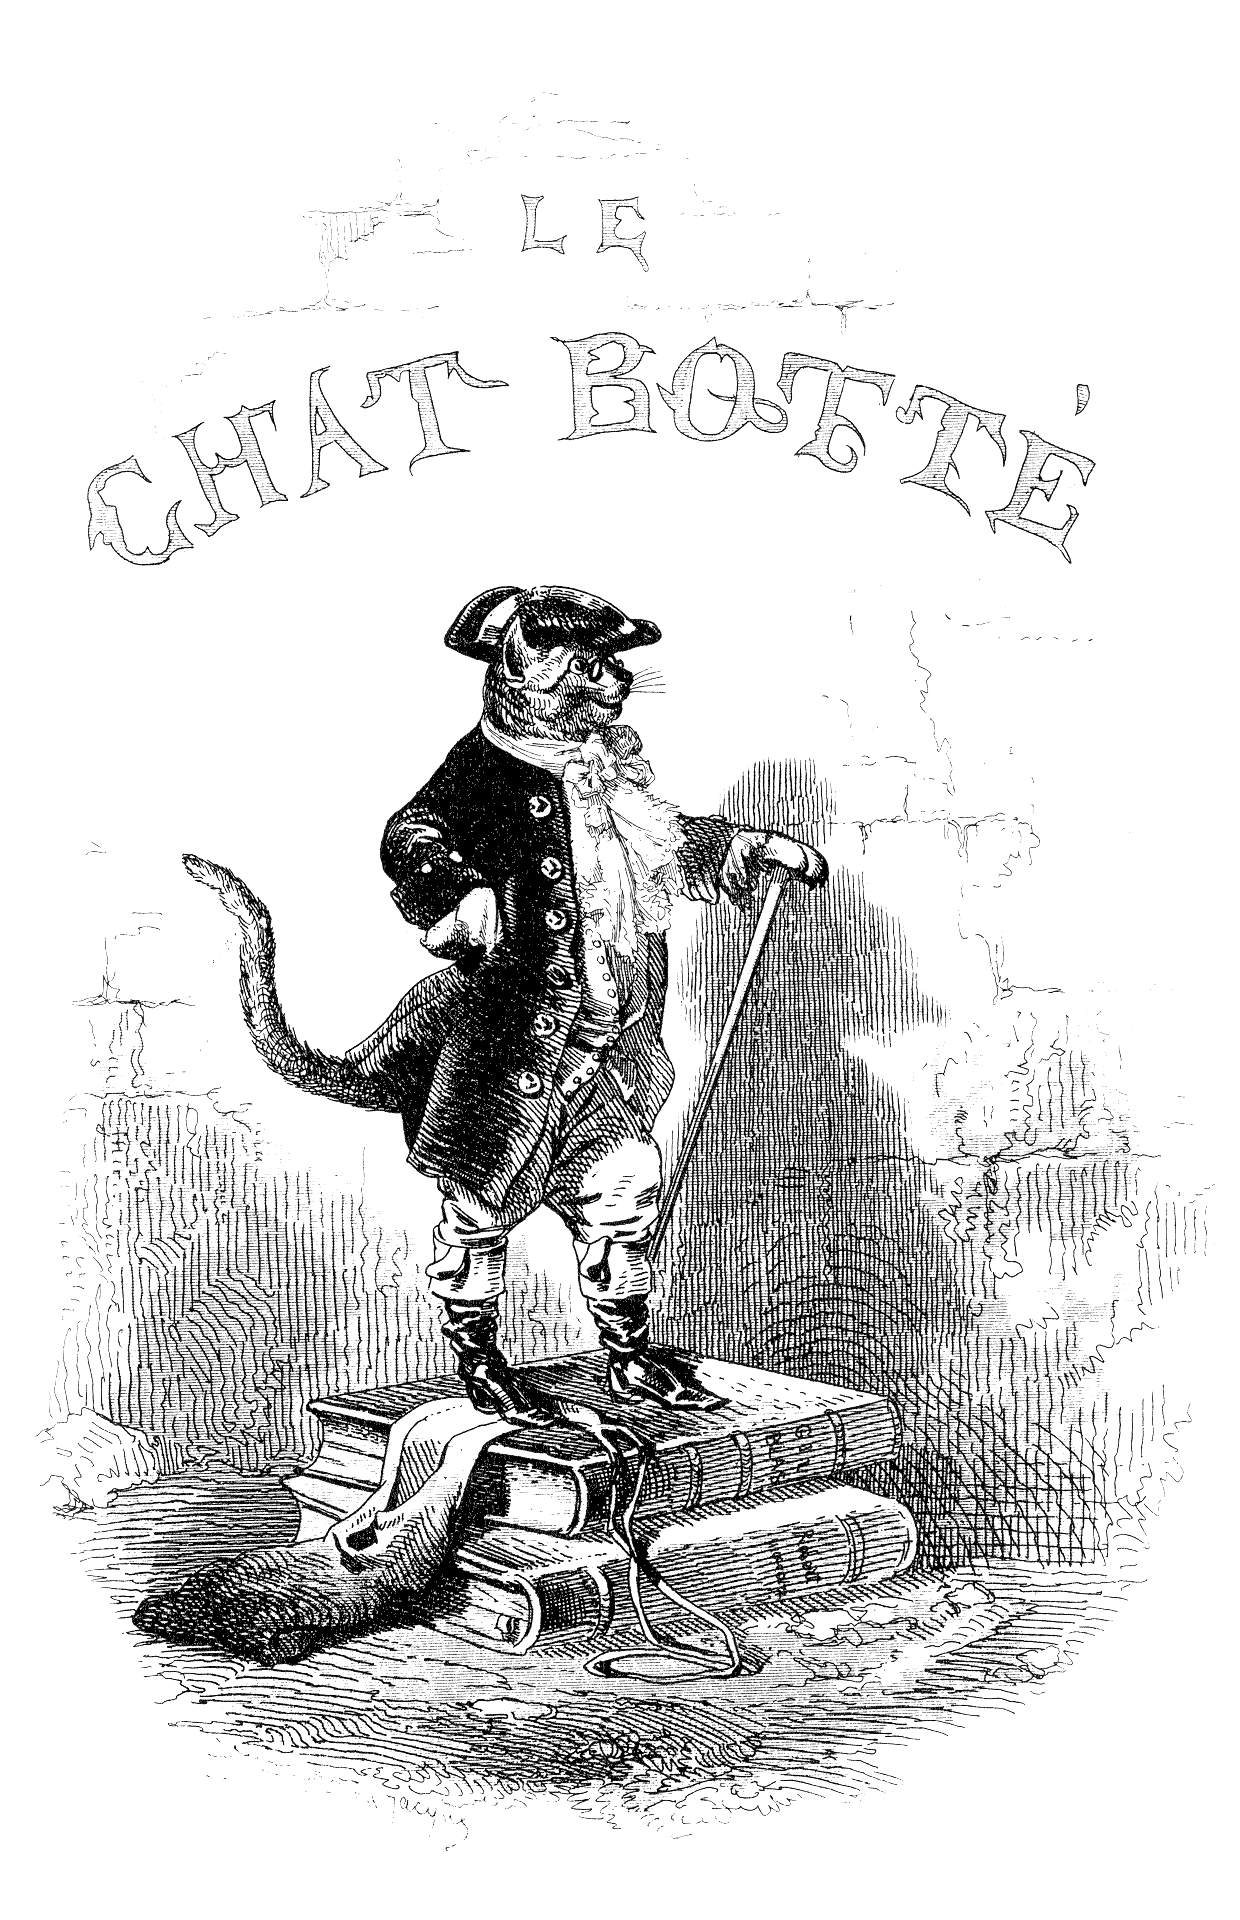 http://upload.wikimedia.org/wikipedia/commons/5/58/%C3%89dition_Curmer_(1843)_-_Le_Chat_bott%C3%A9_-_1.png